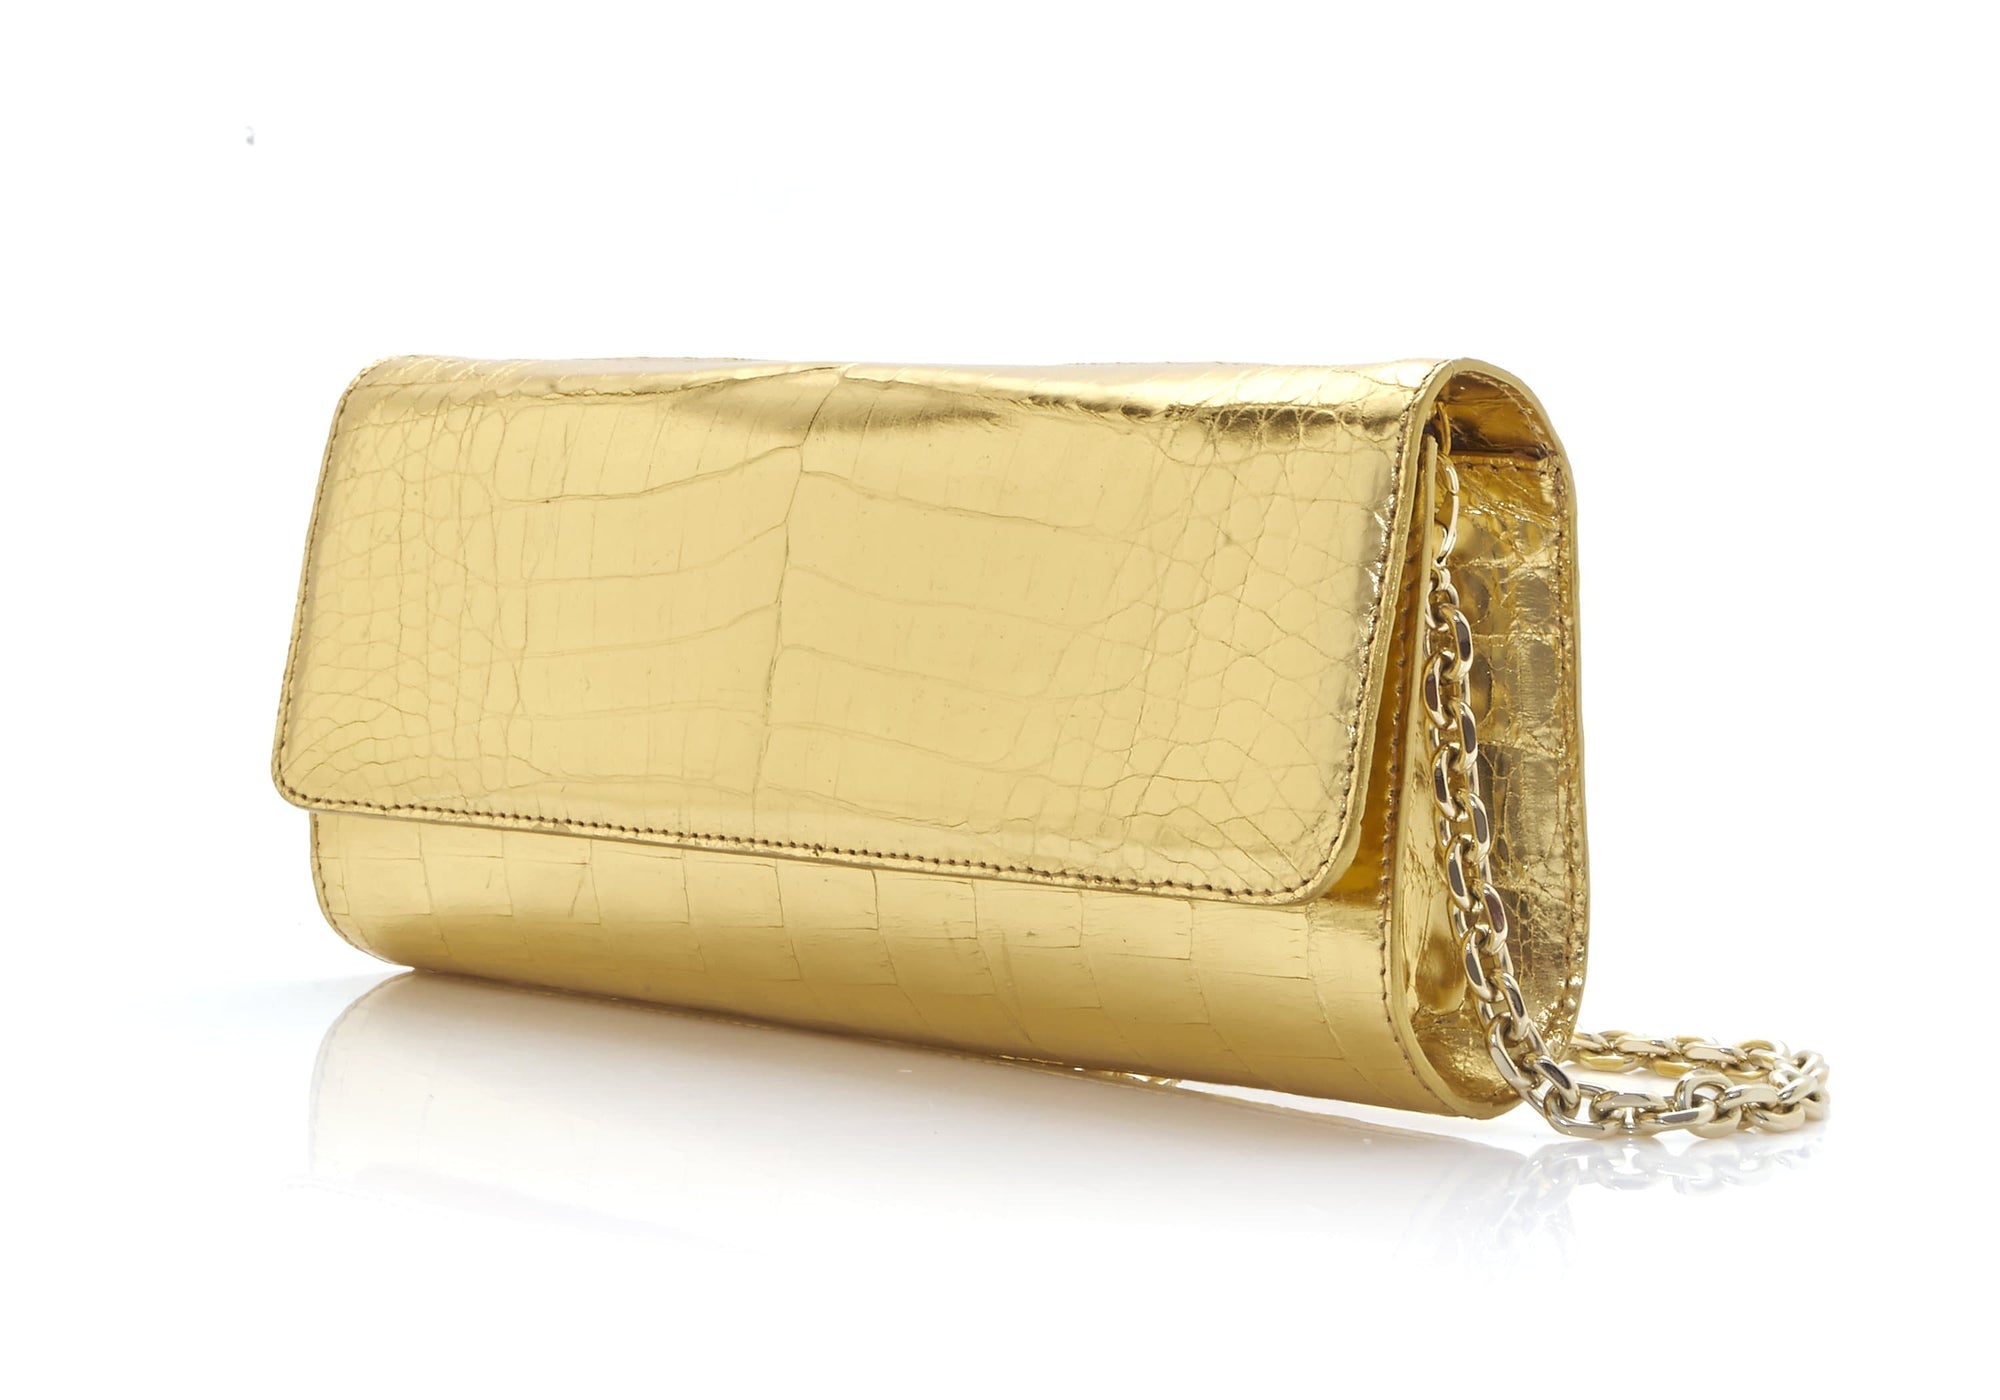 6 Judith Leiber Bags That Epitomize Her Unadulterated Love Of